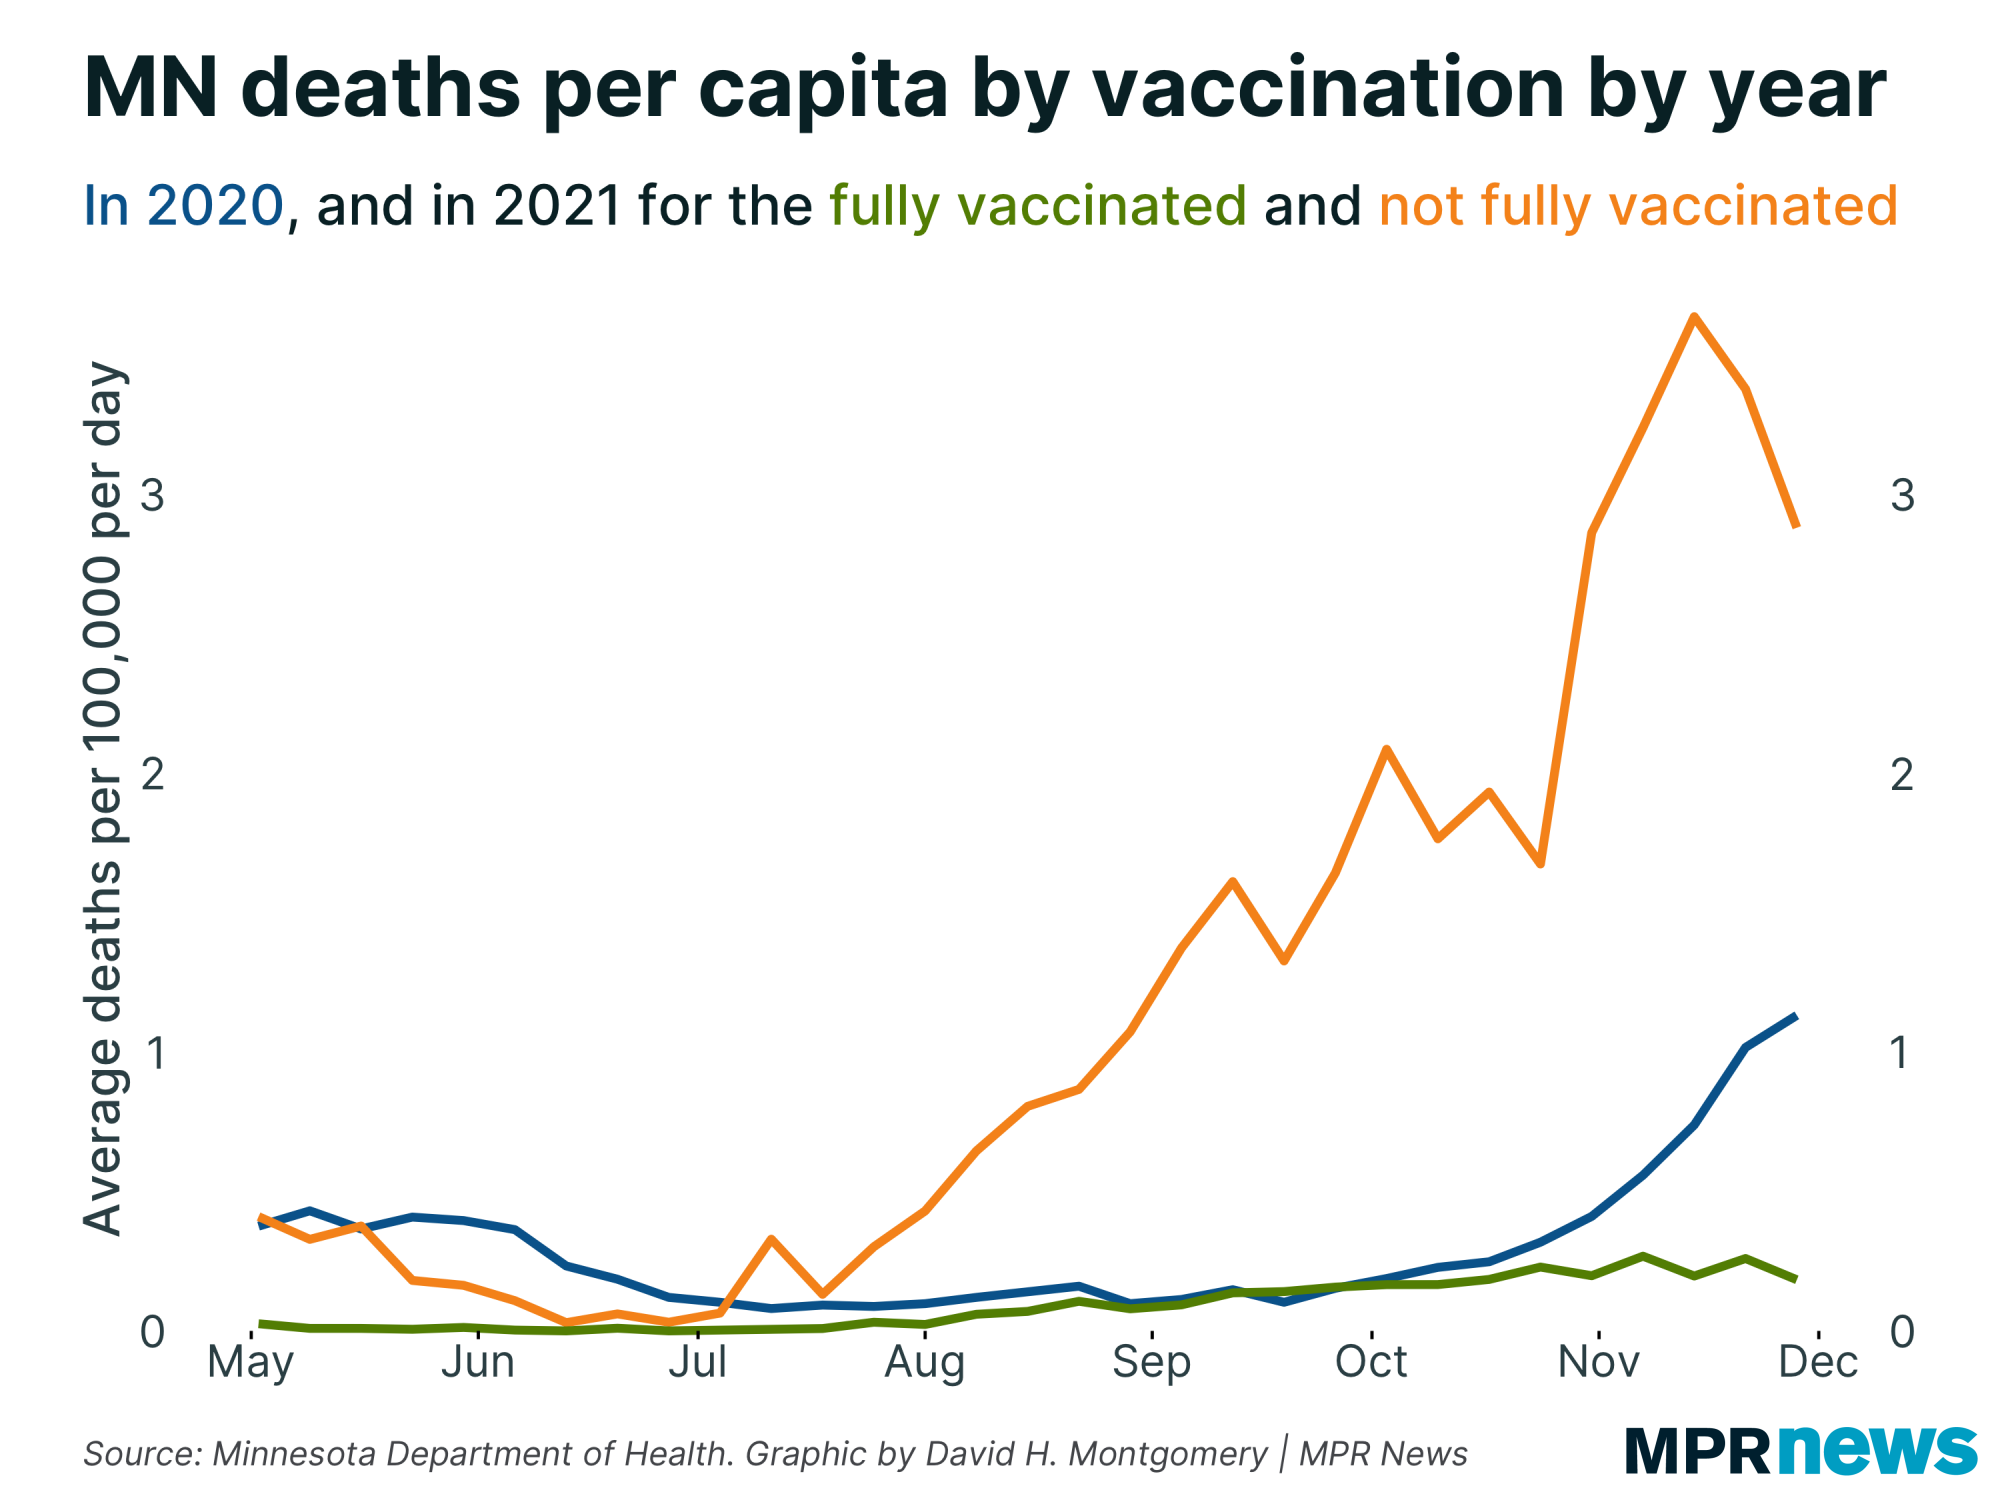 Graph of Minnesota COVID deaths per capita by vaccination status by year